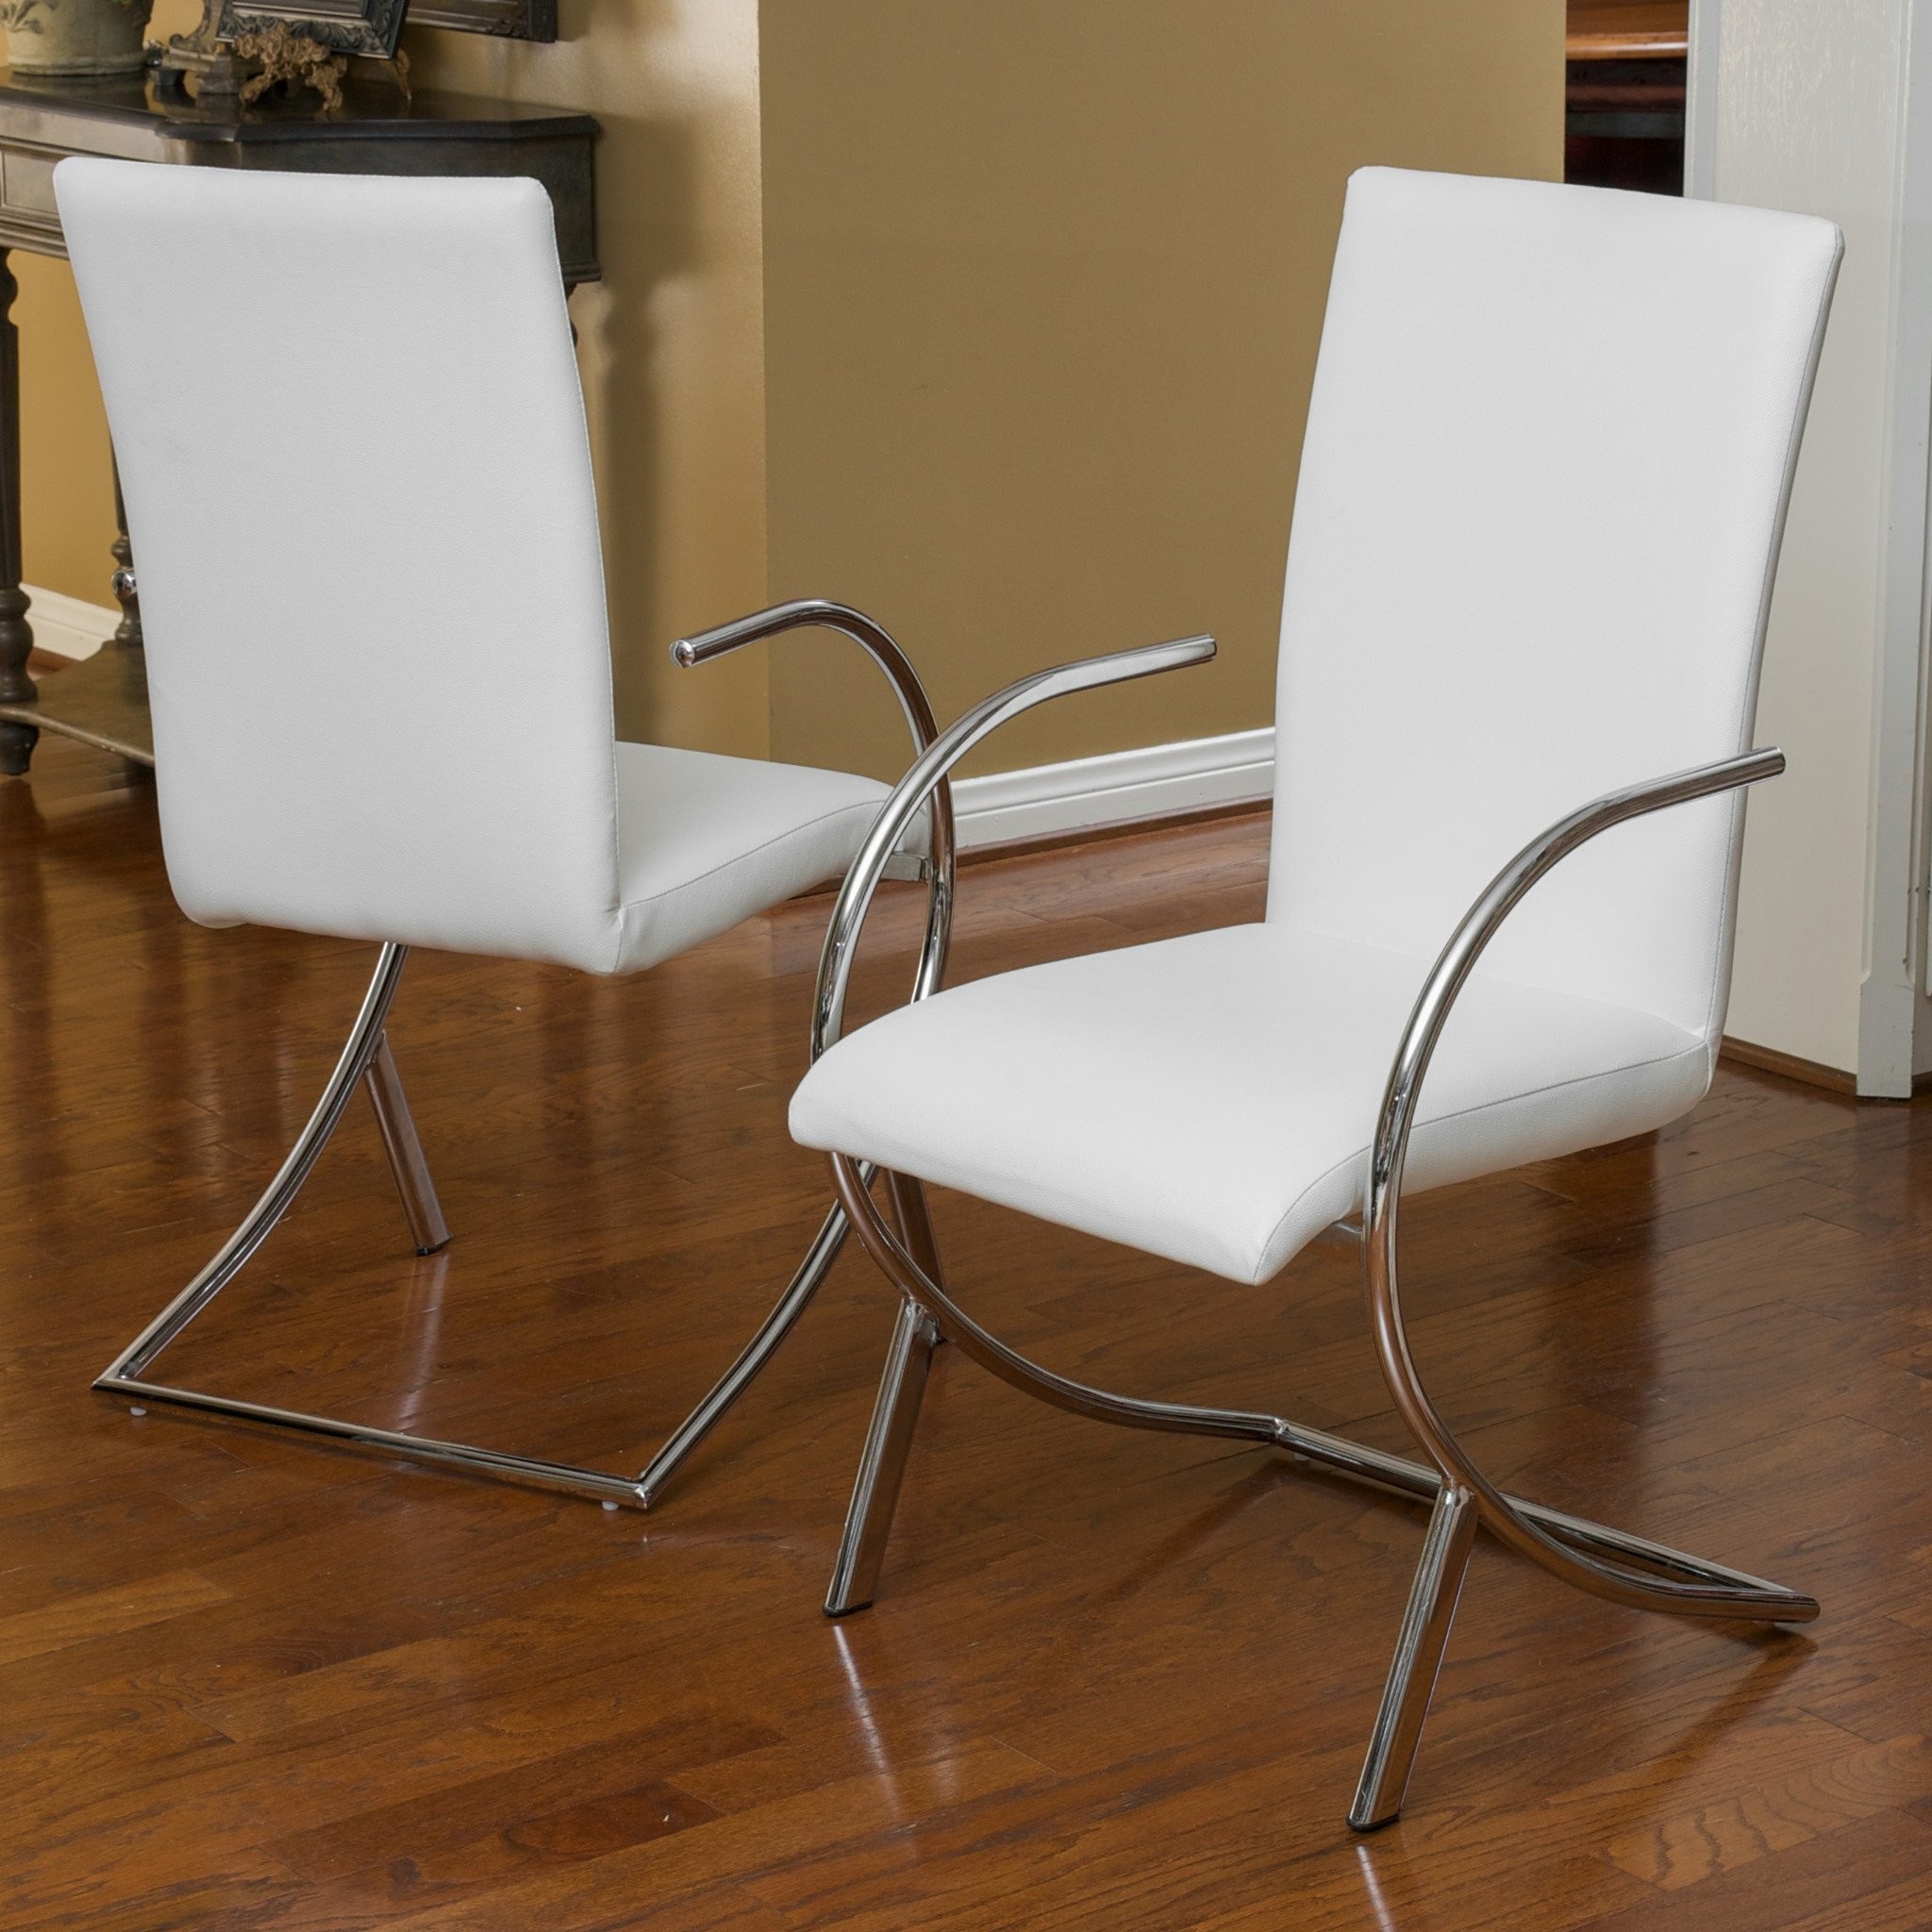 Rockville White Leather Chairs (Set of 2)